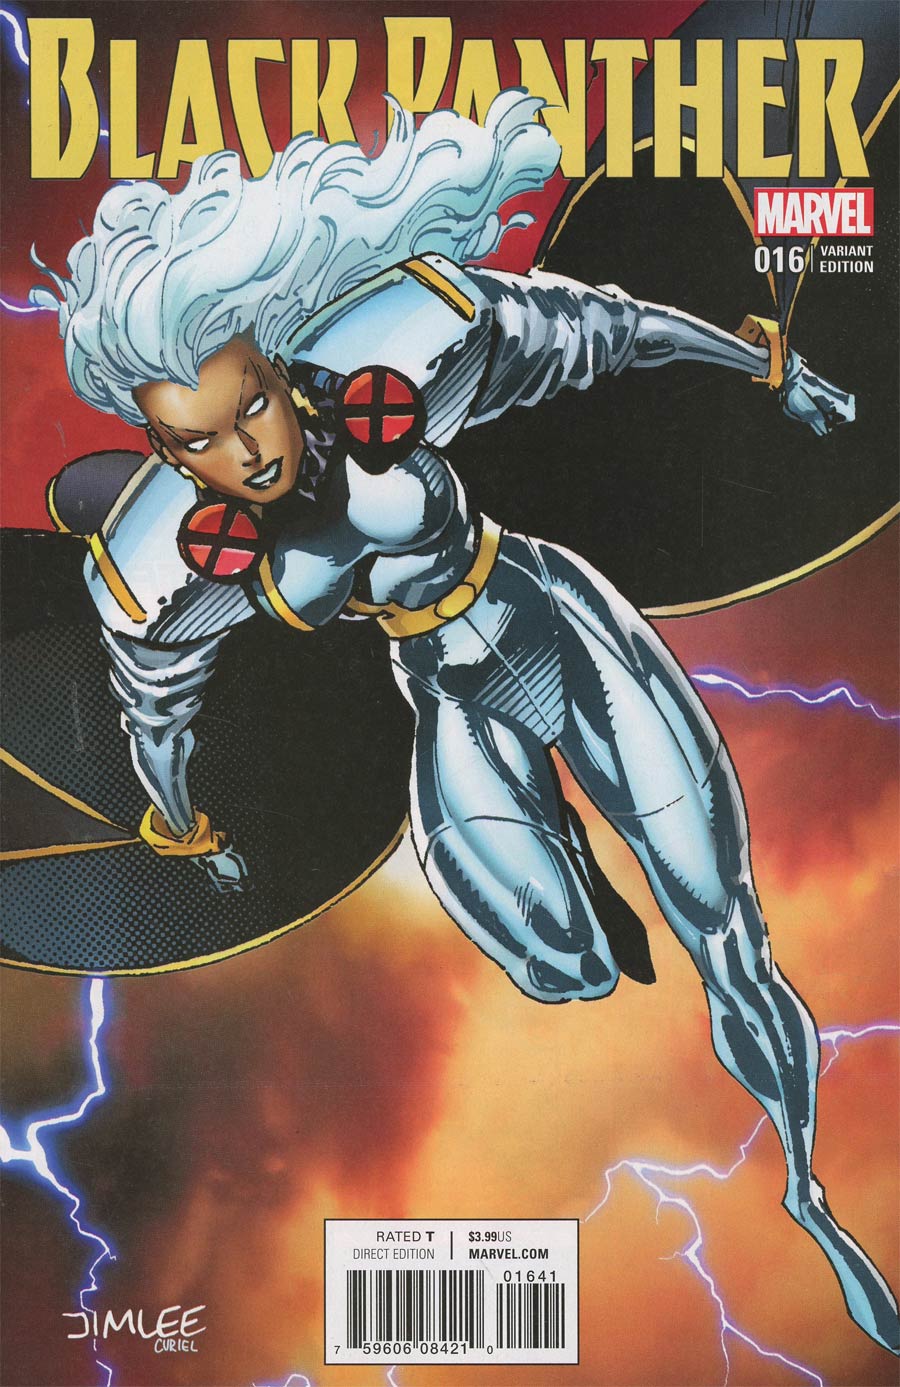 Black Panther Vol 6 #16 Cover C Variant Jim Lee X-Men Trading Card Cover